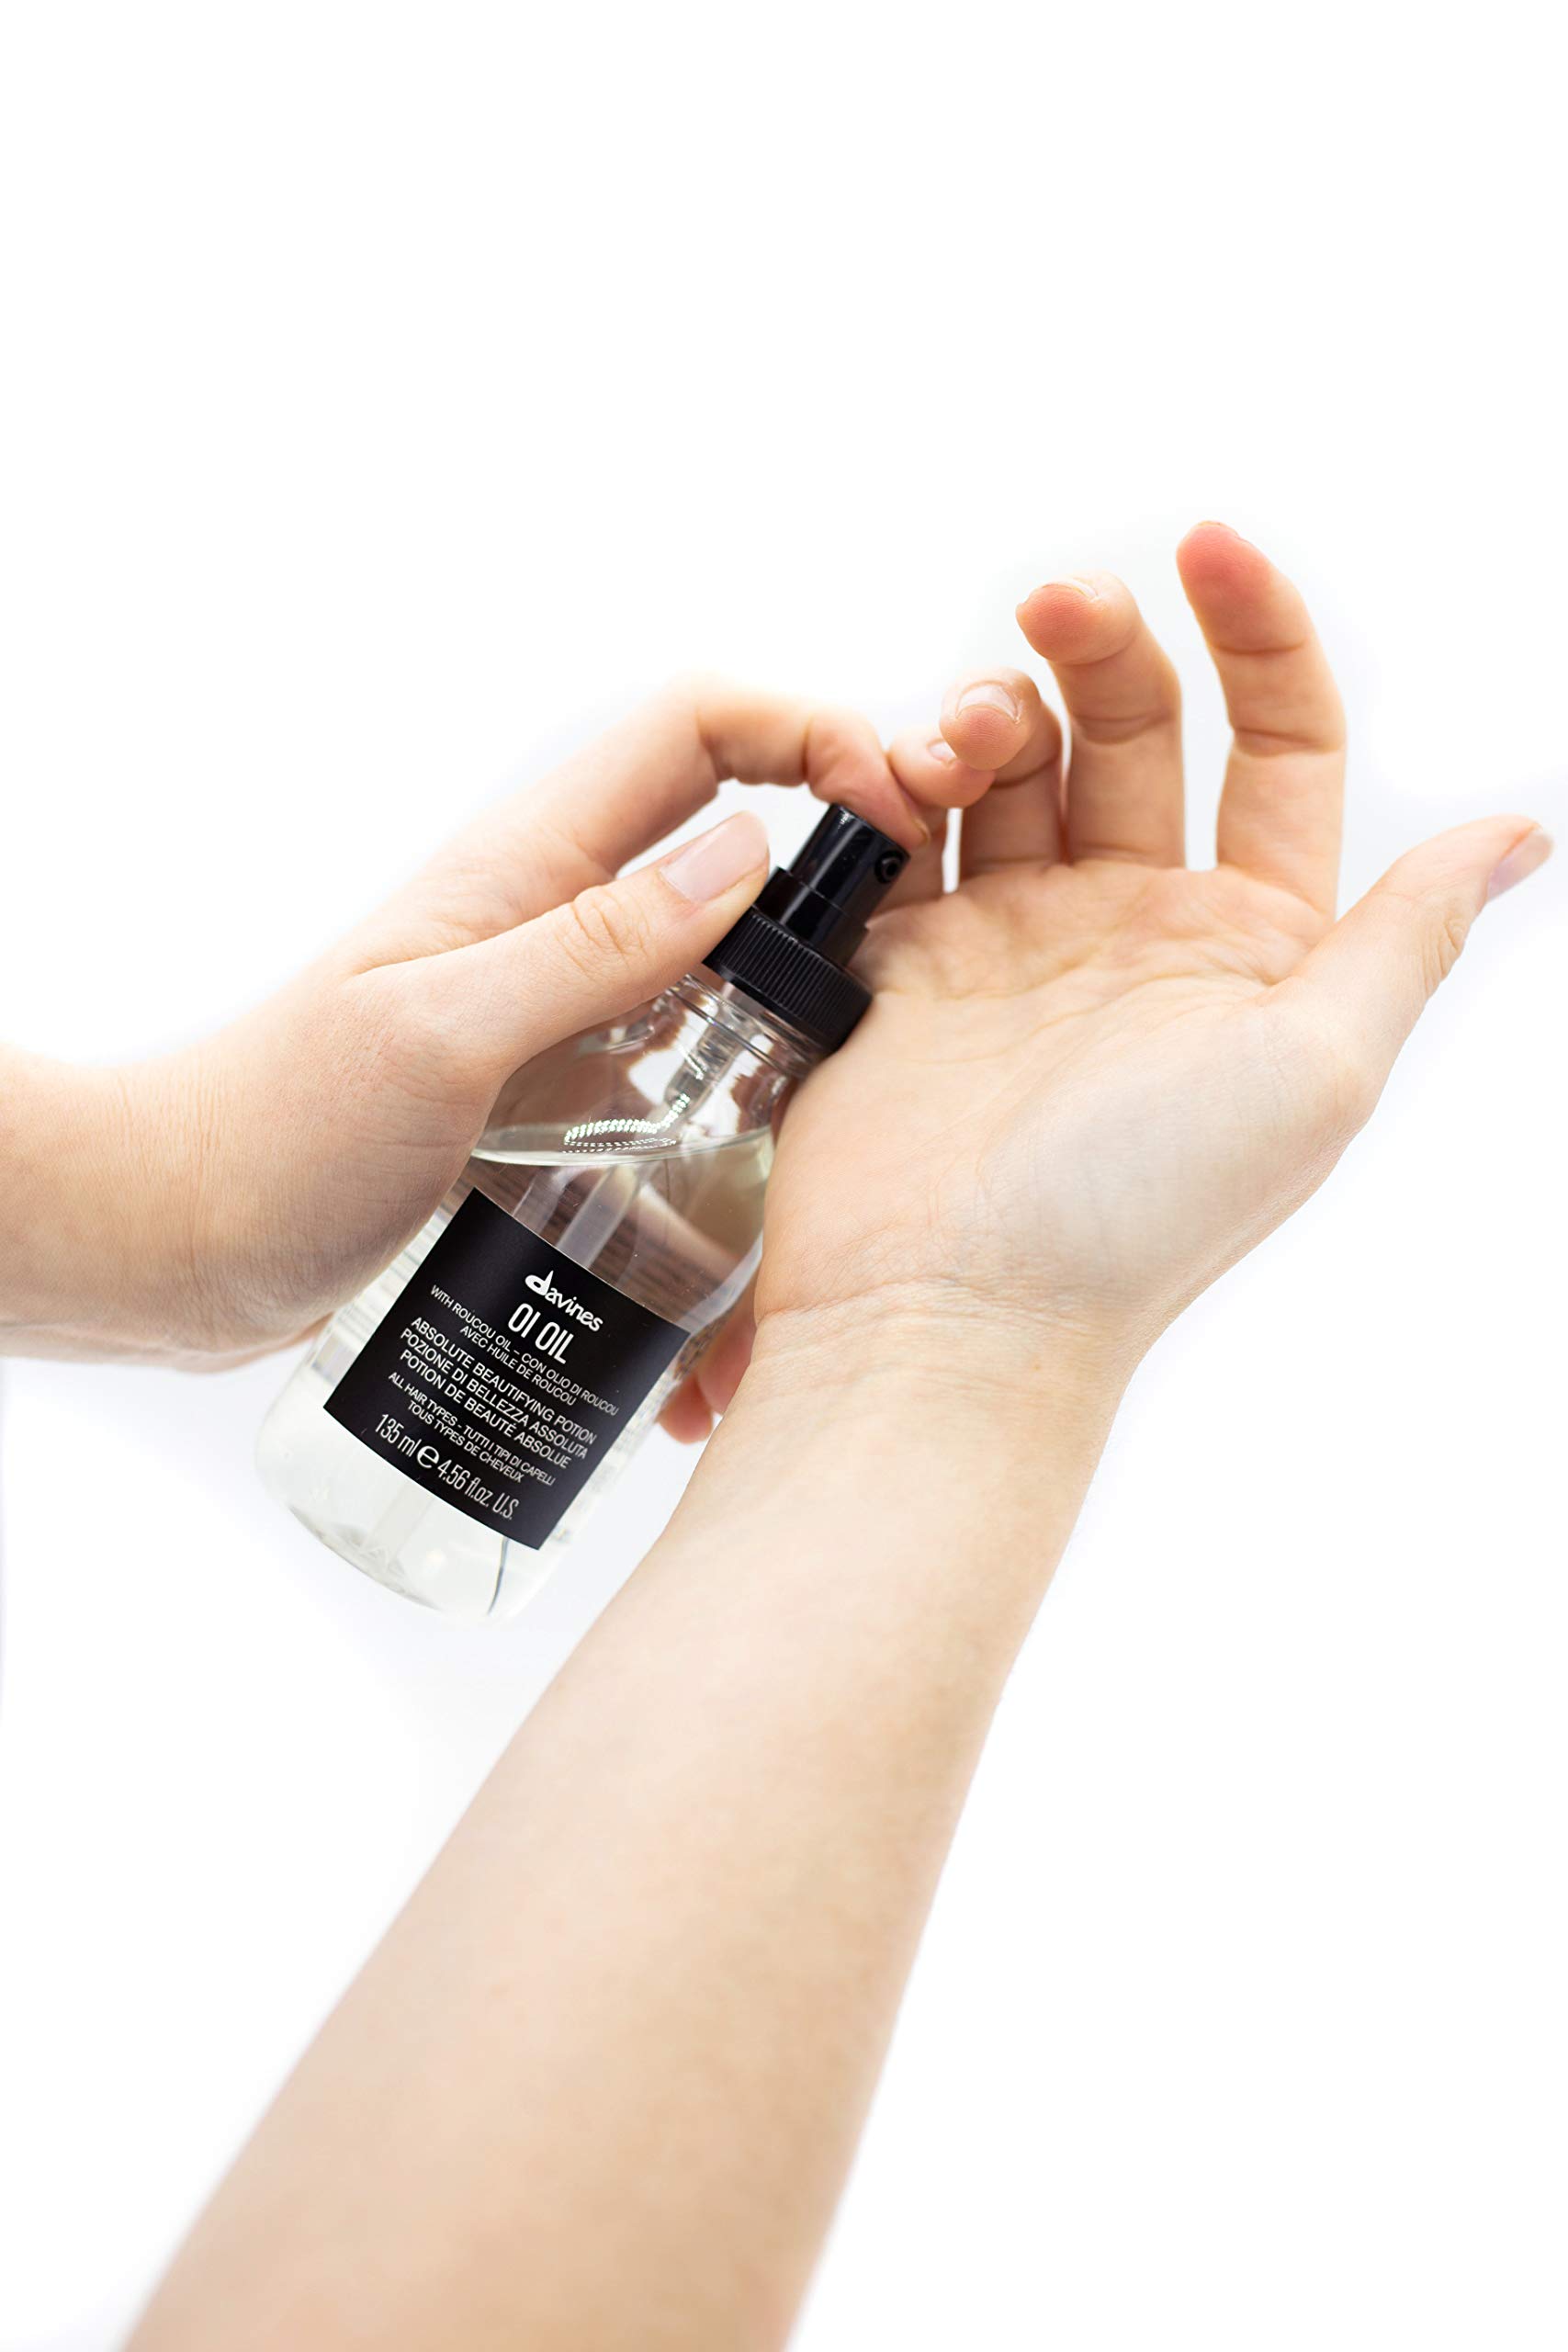 Davines OI Oil | Weightless Hair Oil Perfect for Dry Hair, Coarse & Curly Hair Types | Conrol Frizz | Soft, Shiny Hair